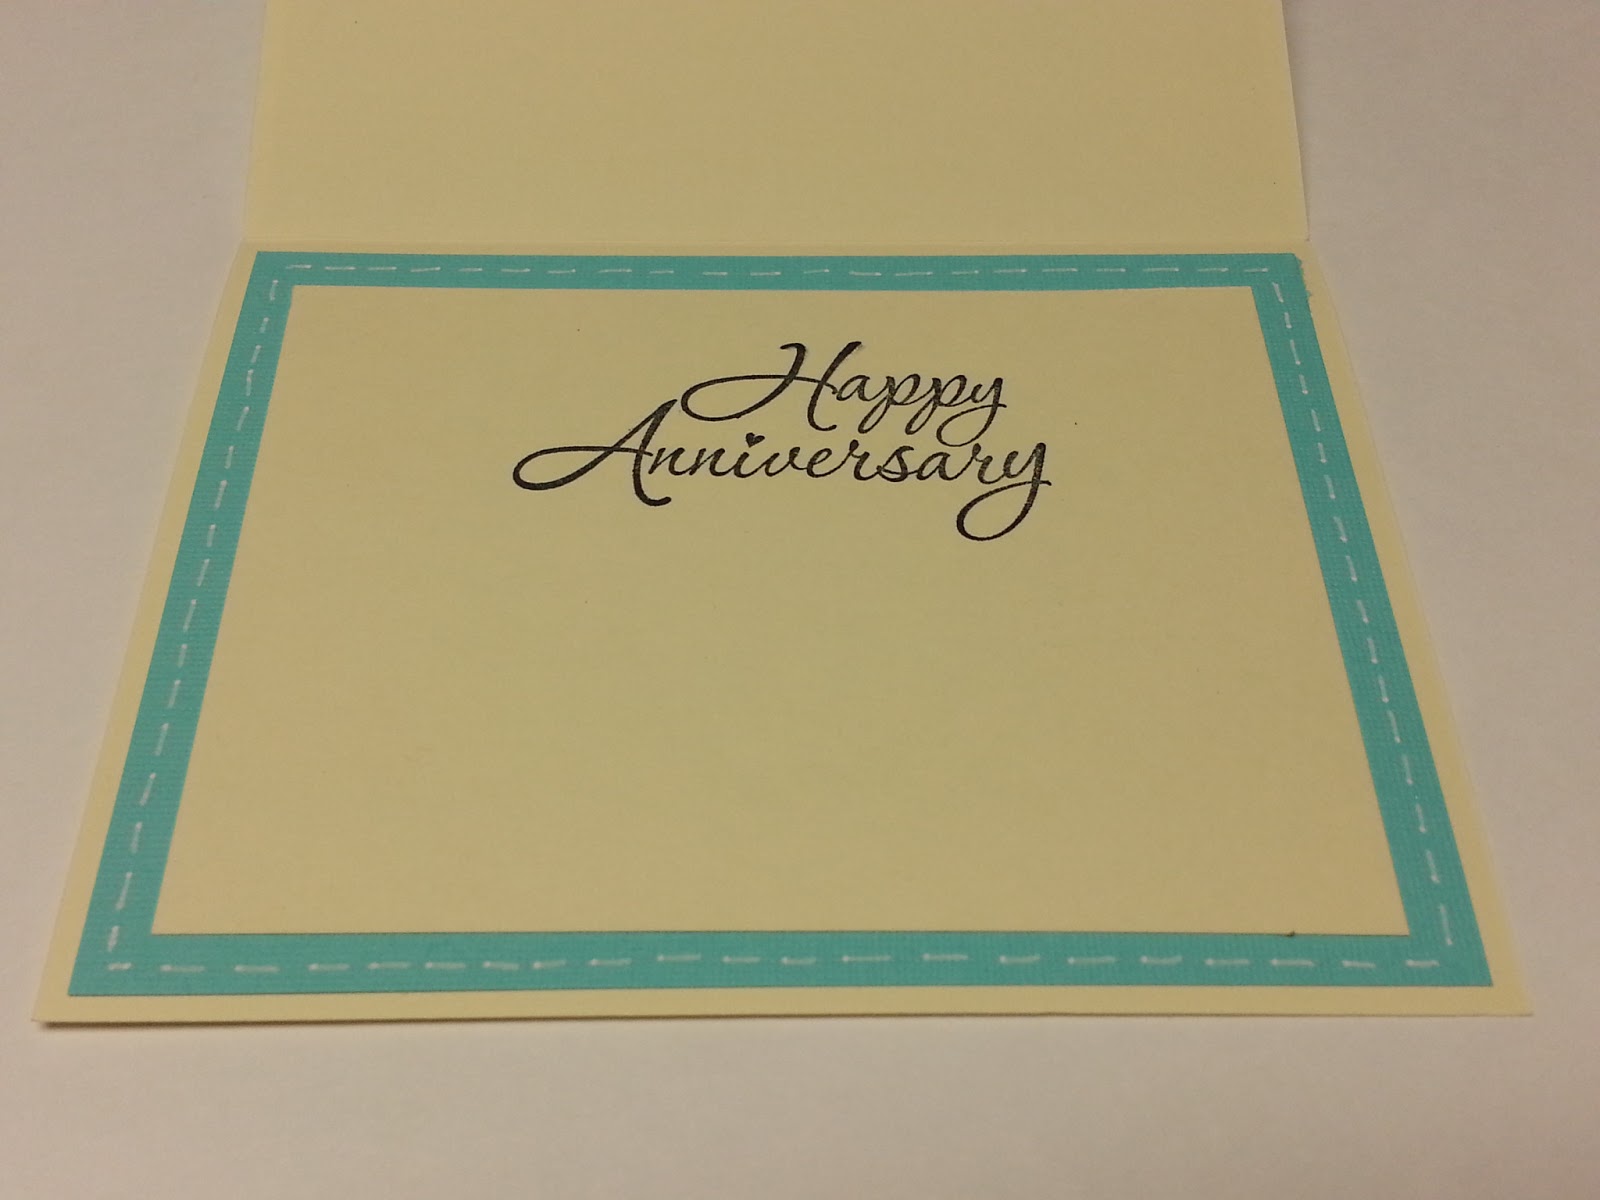 anderson-s-treasures-card-gallery-new-anniversary-card